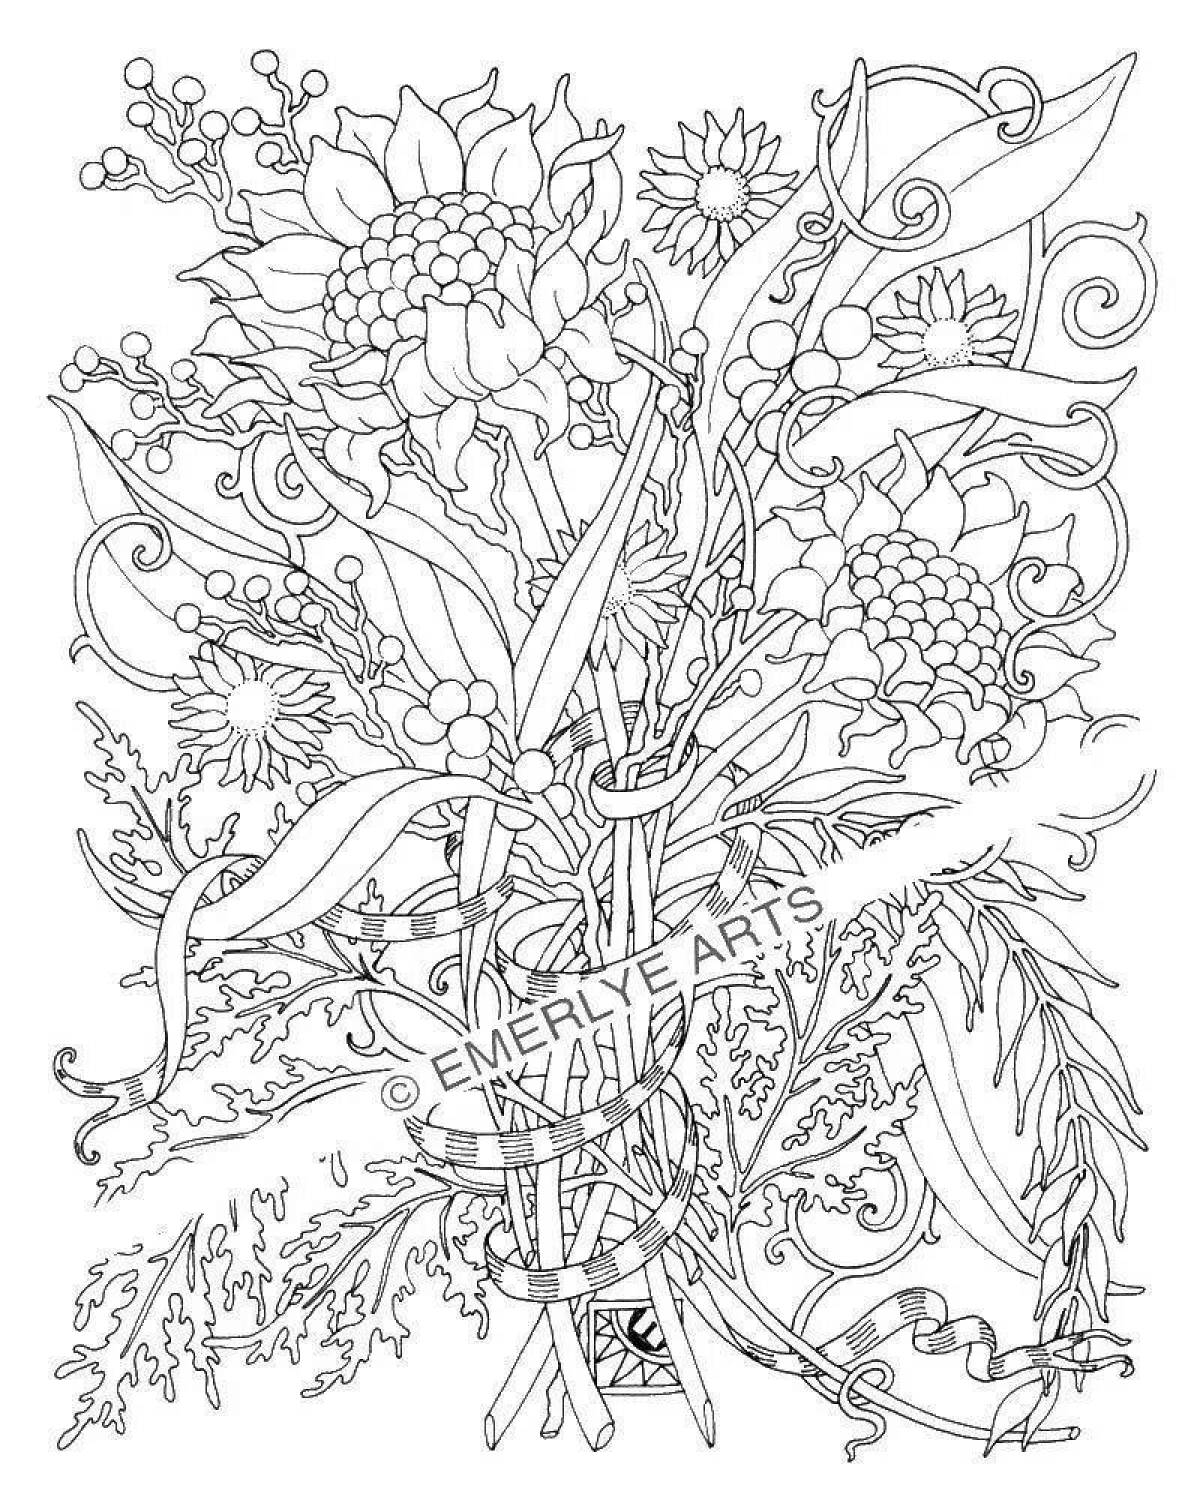 Amazing coloring pages for adults